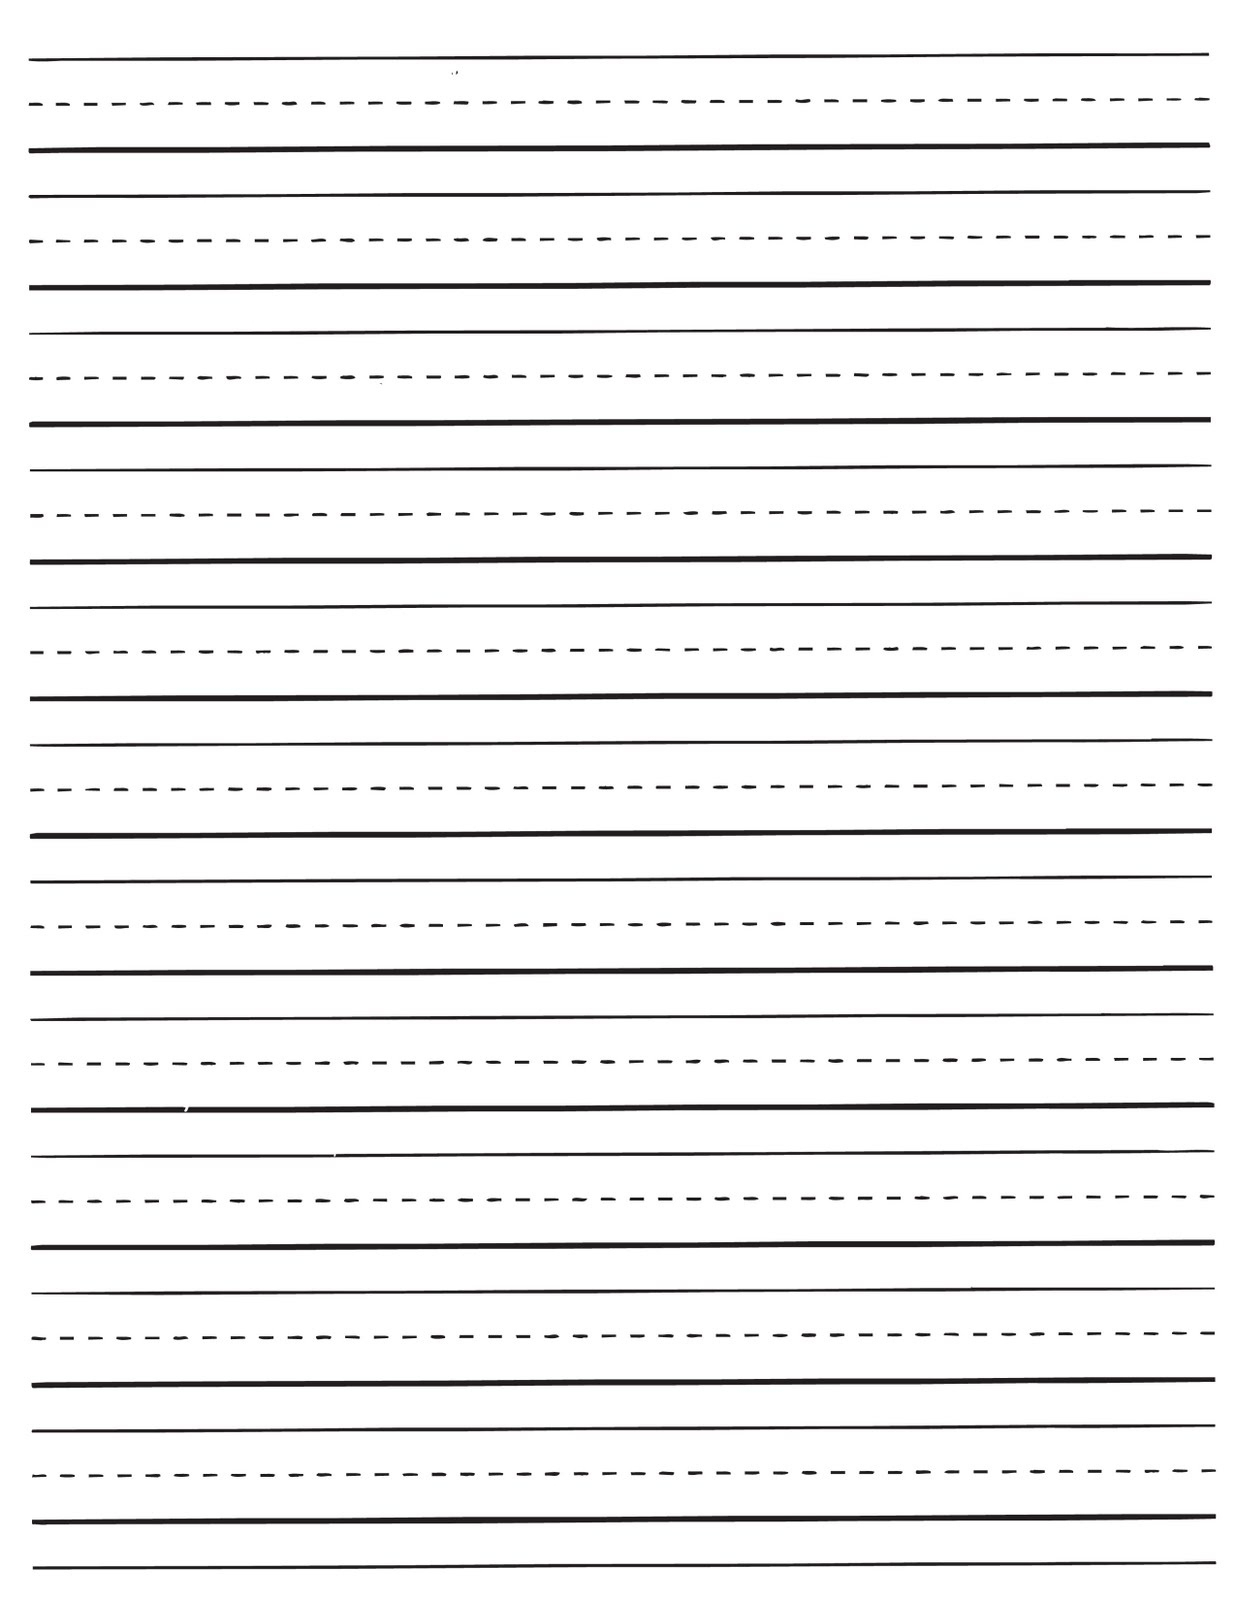 Printable Lined Paper For Kids | World Of Label - Free Printable Lined Handwriting Paper